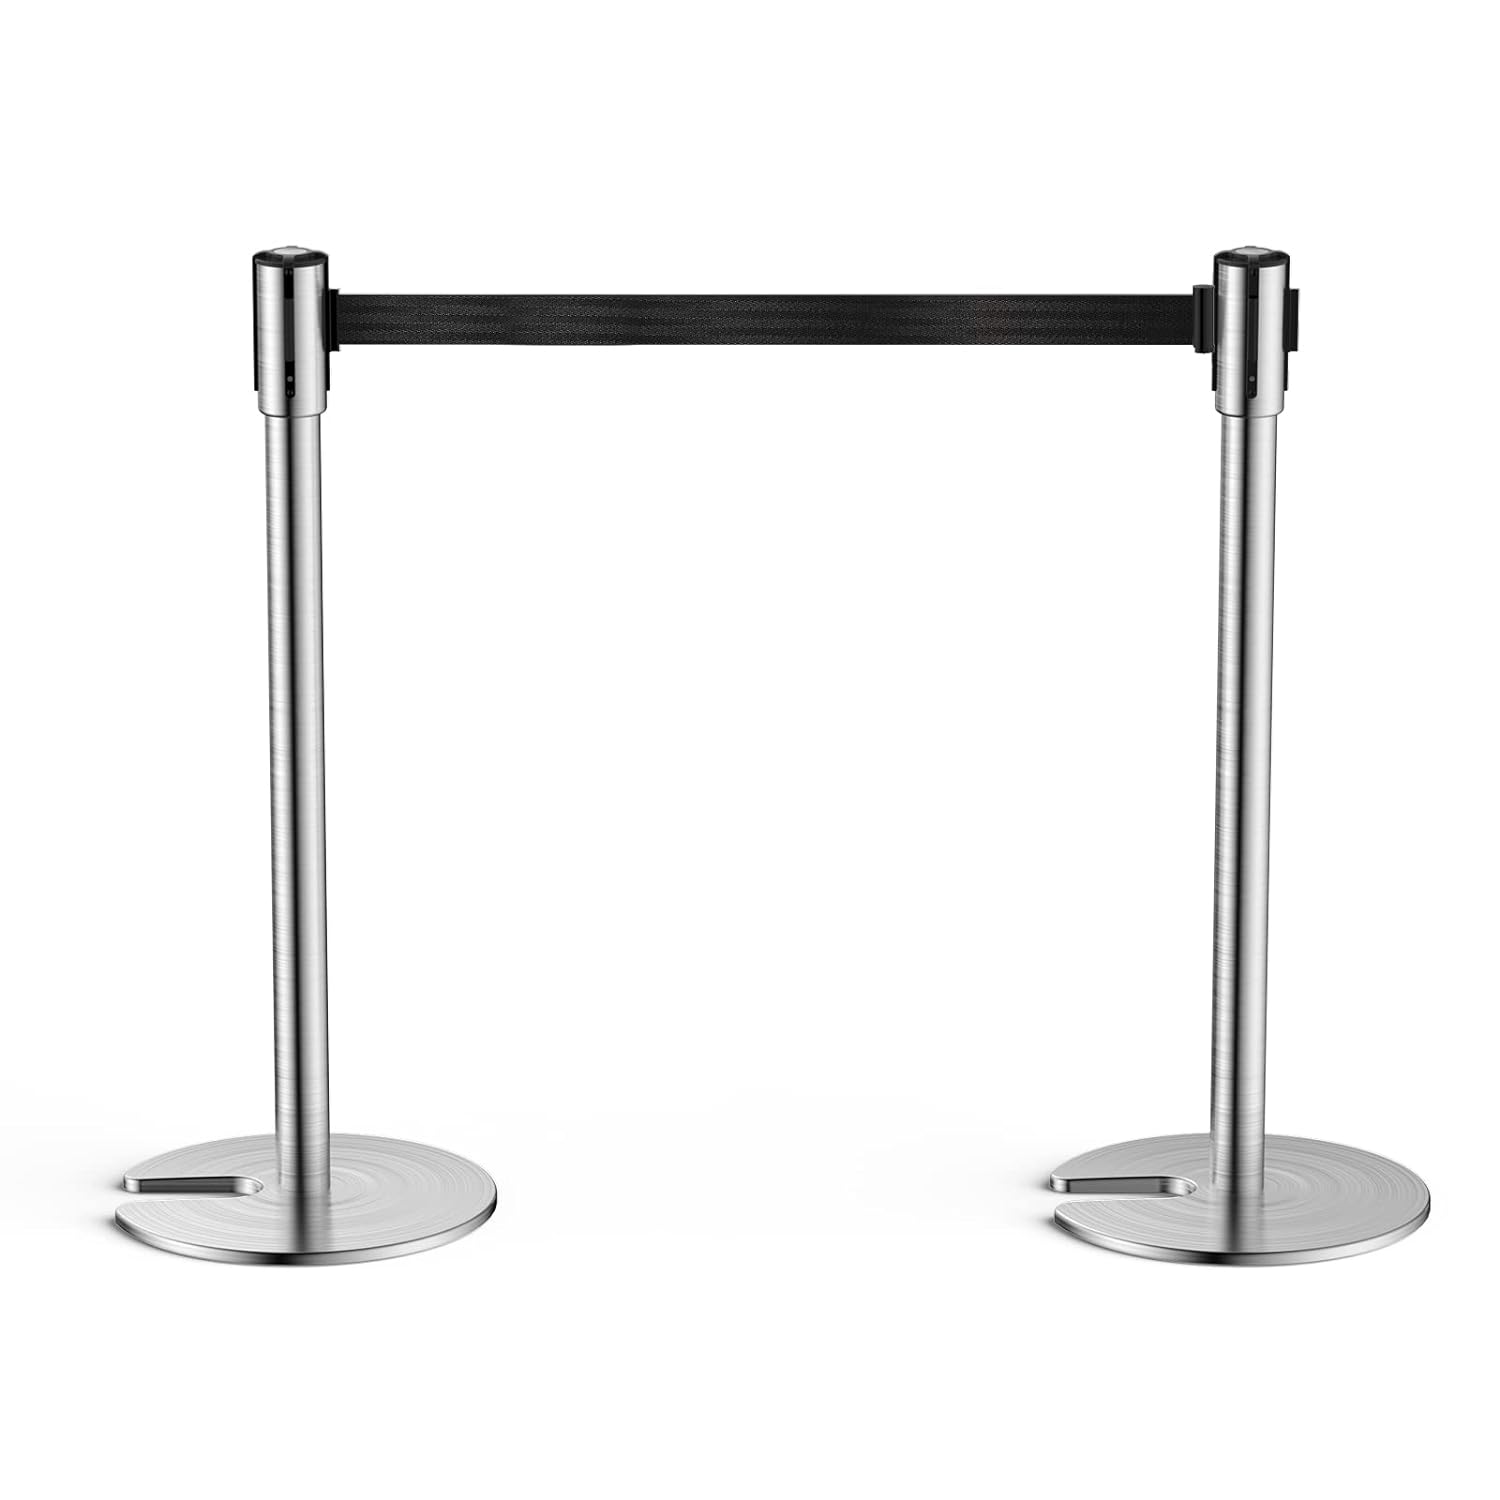 TURBRO Super Heavy-Duty Stainless Steel Stanchion, 17 Lbs ea. Retractable Barriers with 4-Way Secure Lock, Set of 2